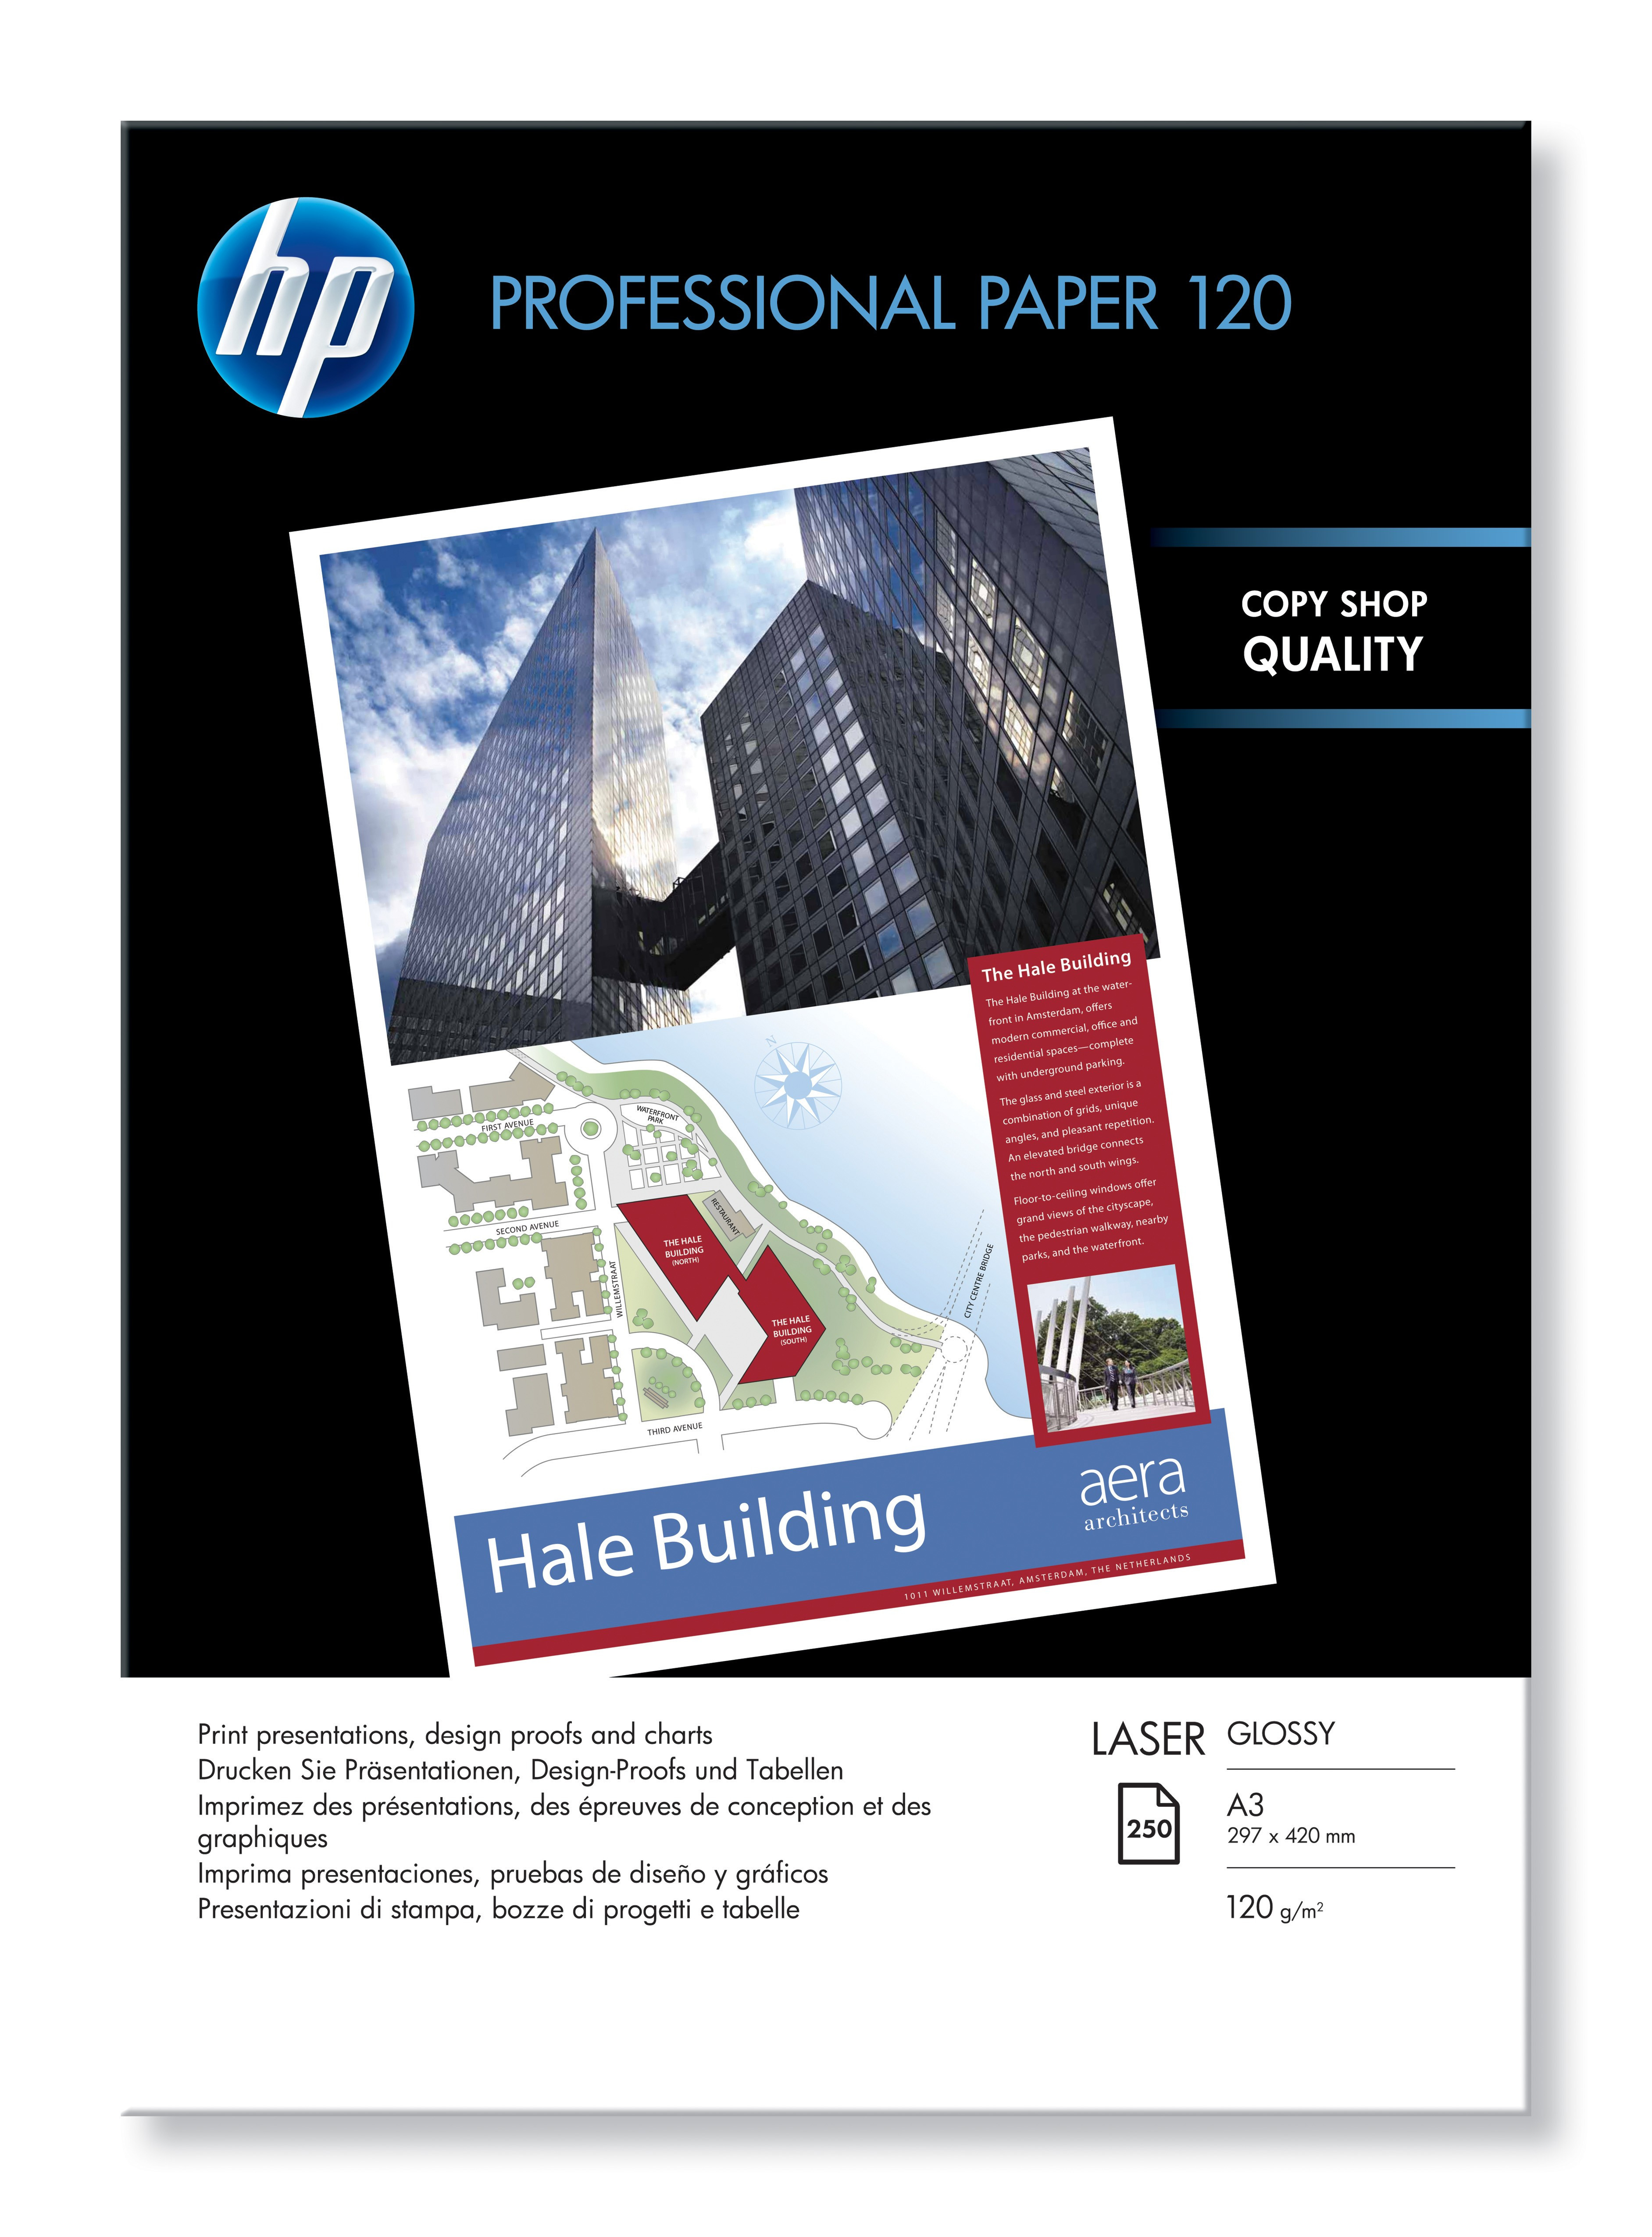 HP professional Laser paper 120 Glossy